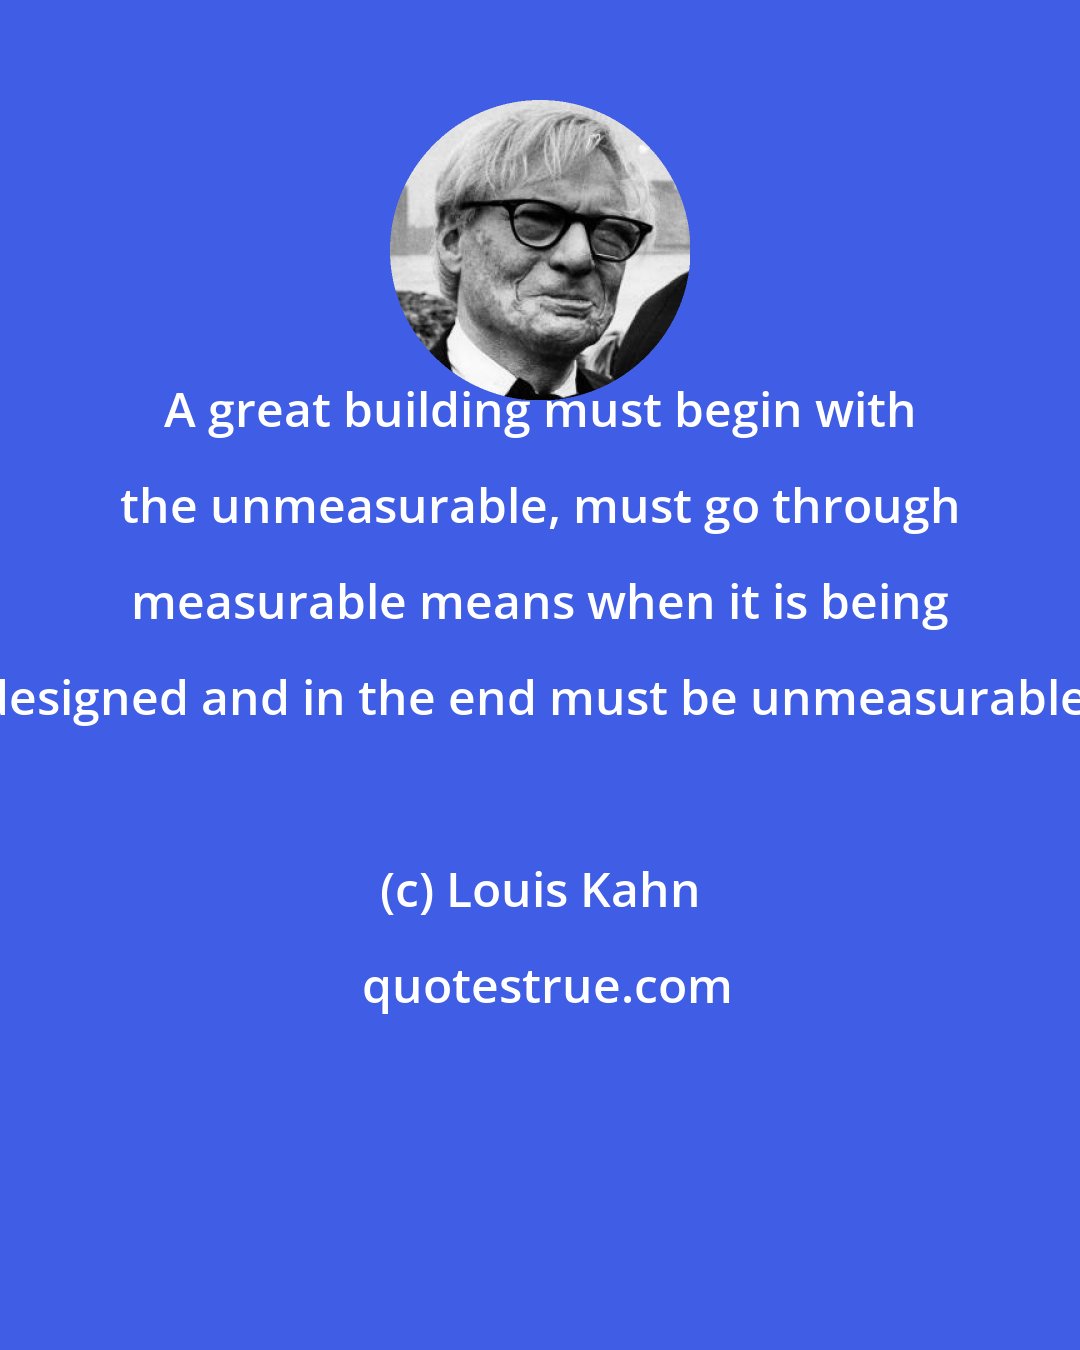 Louis Kahn: A great building must begin with the unmeasurable, must go through measurable means when it is being designed and in the end must be unmeasurable.